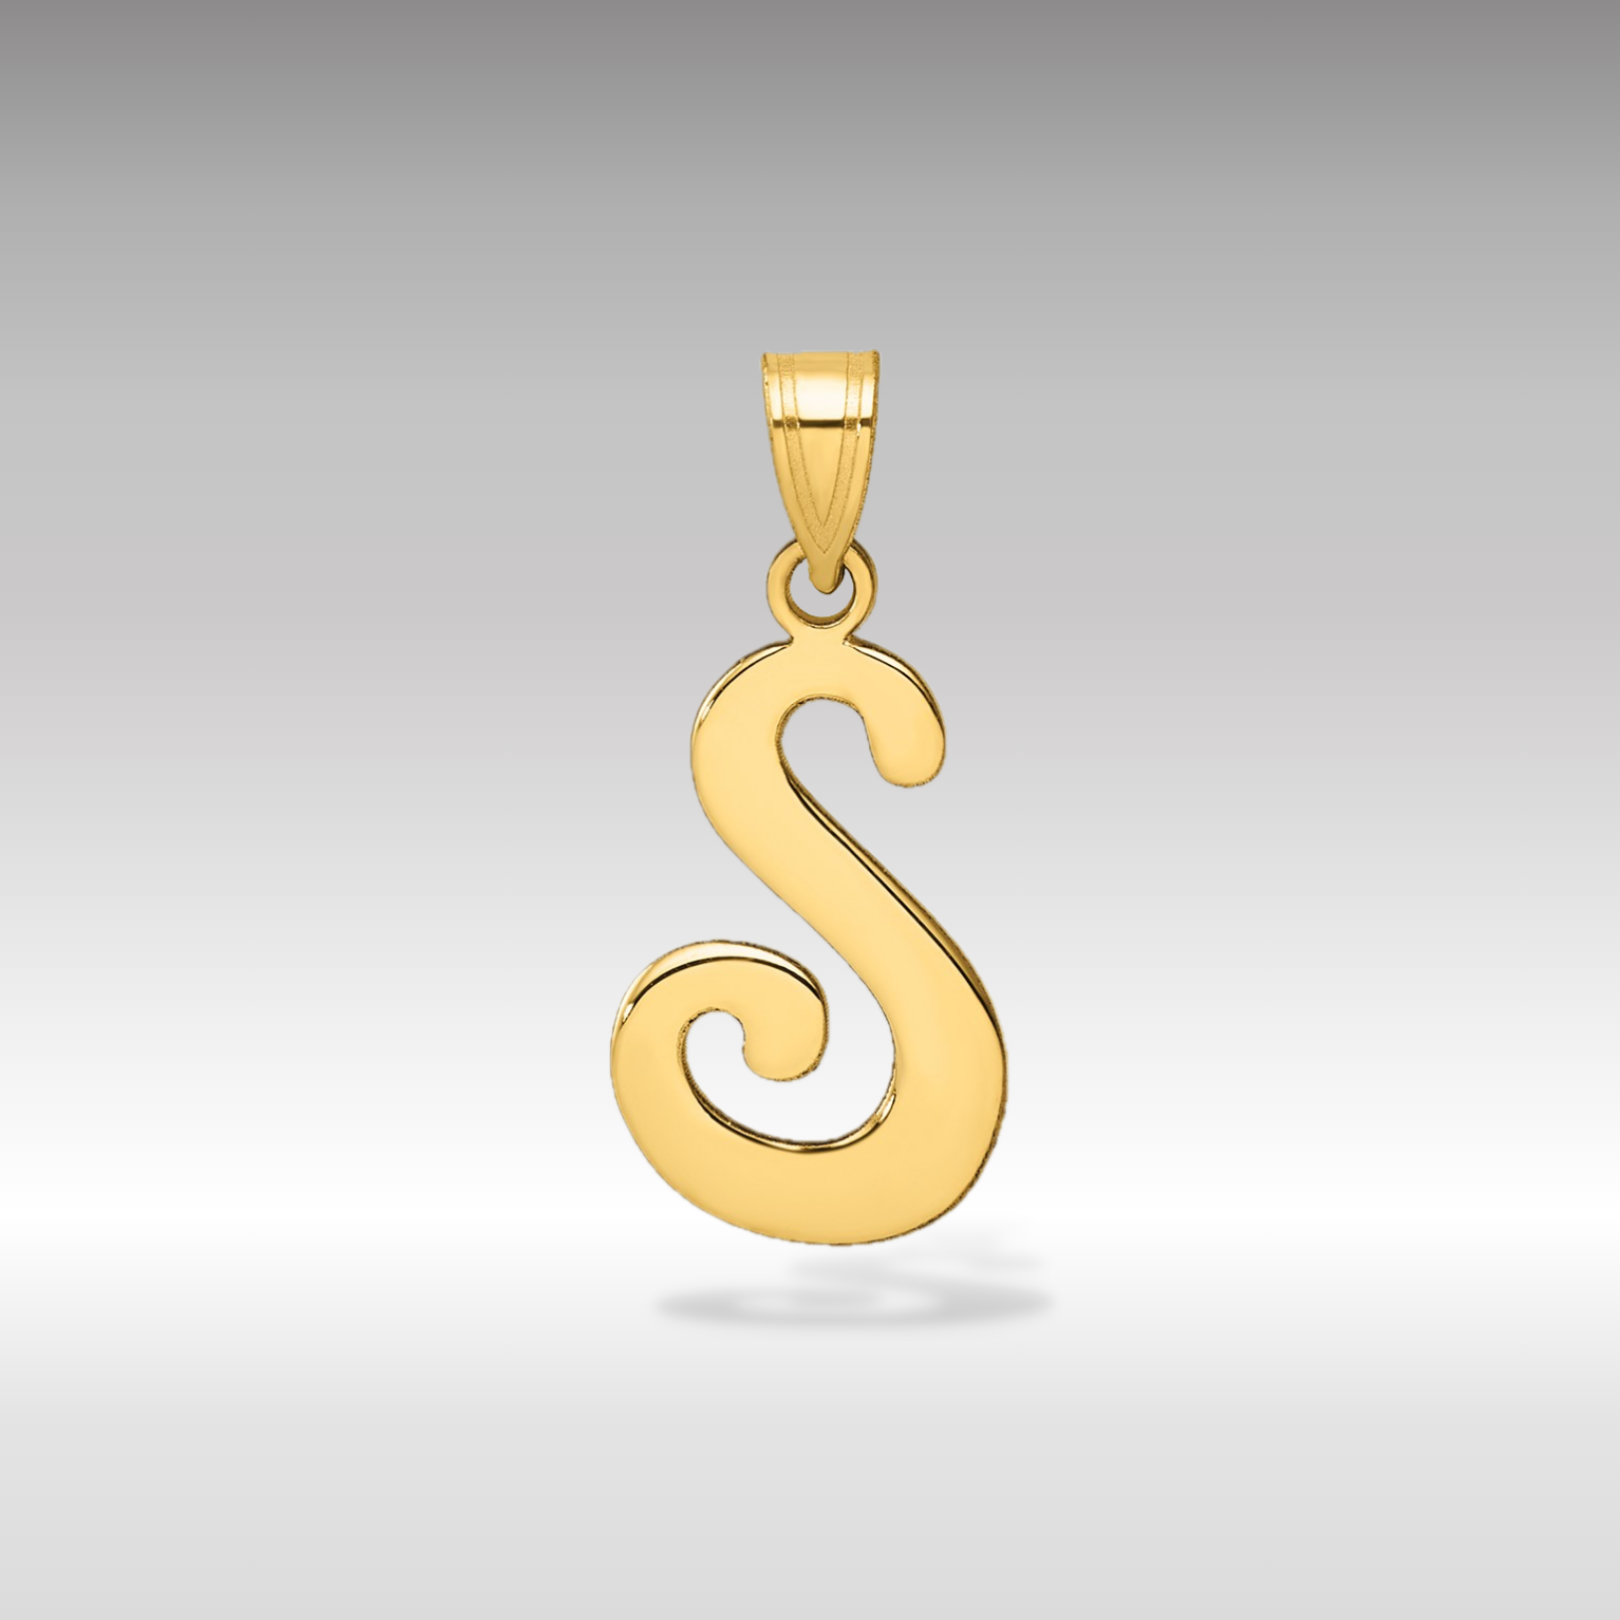 14K Gold Large Letter "S" Script Initial Pendant - Charlie & Co. Jewelry